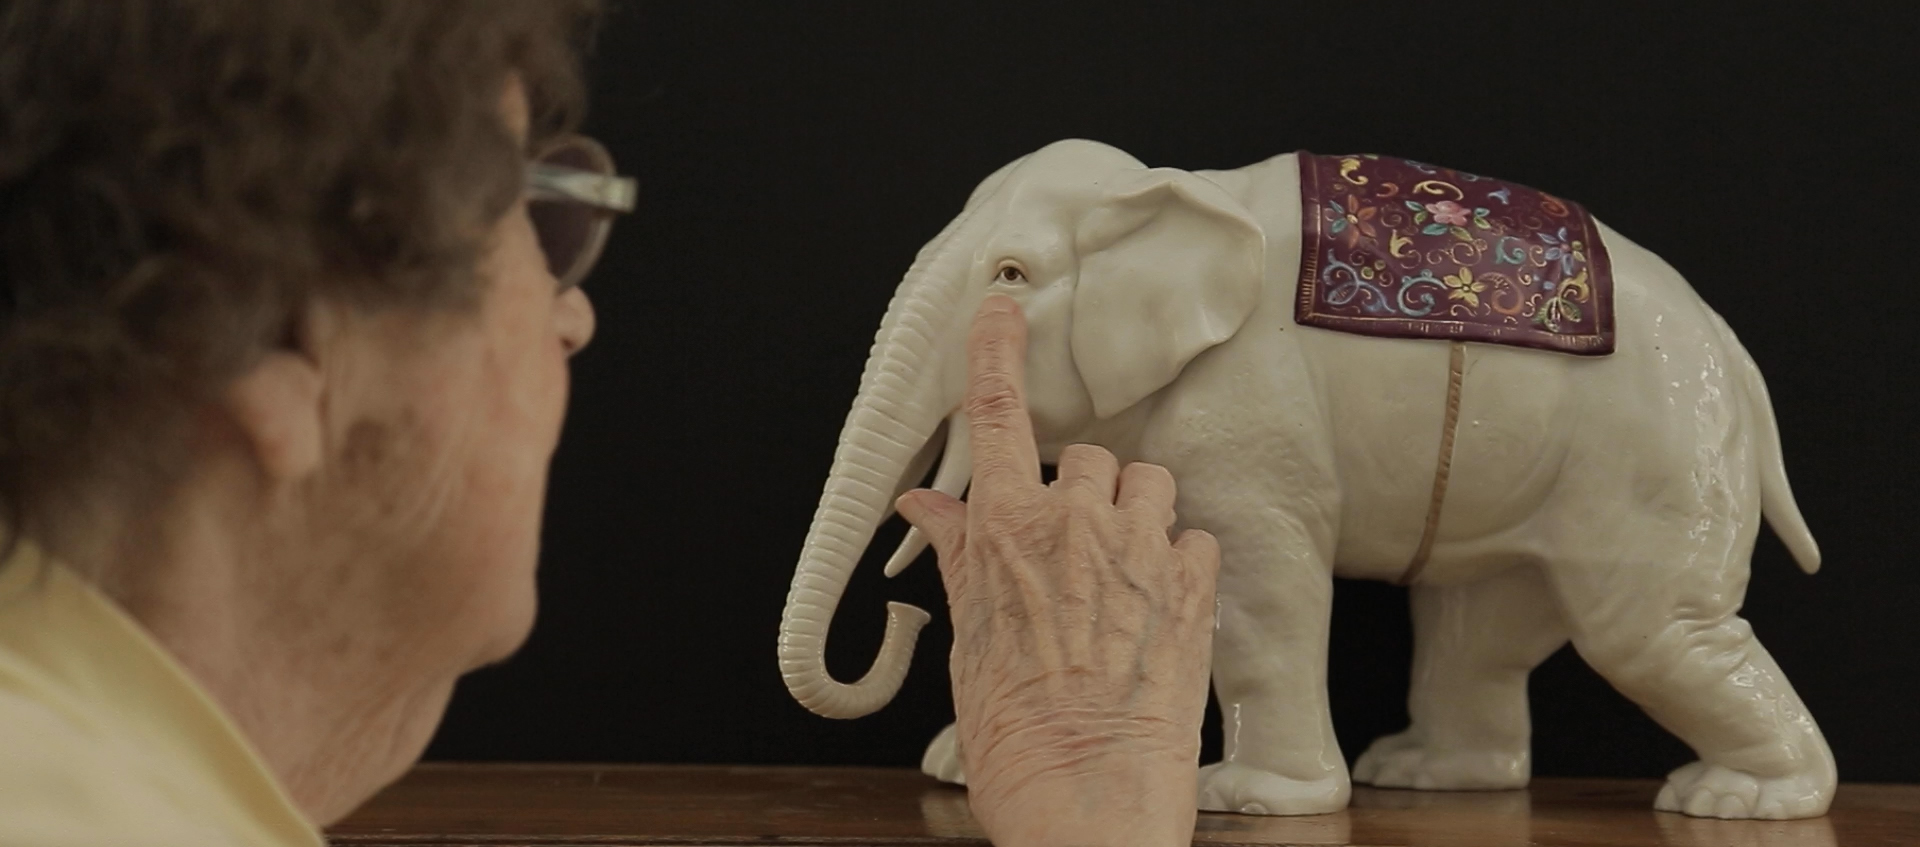 An older woman is touching the eye of a white elephant figurine.